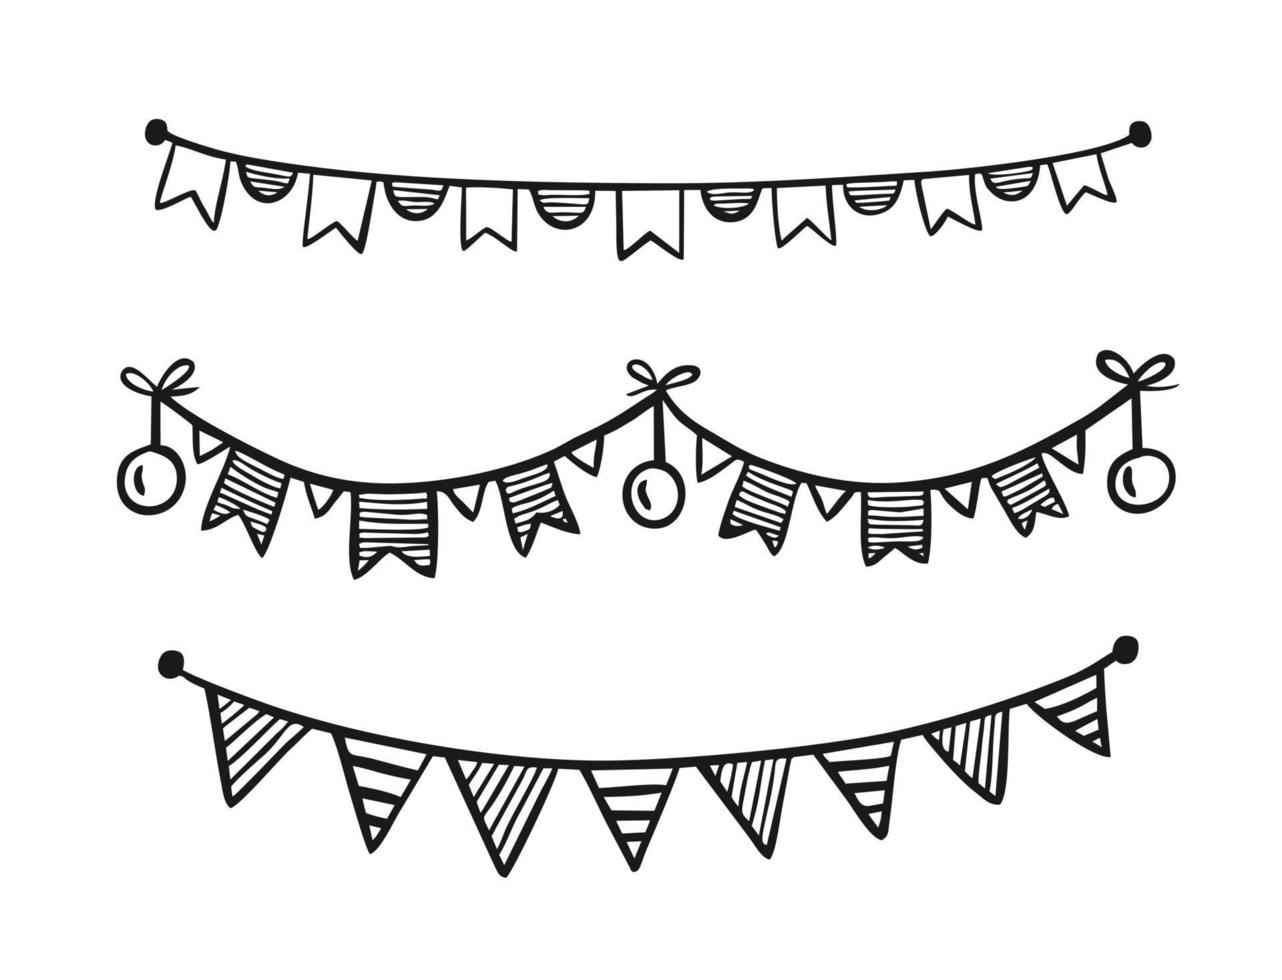 Festive garland painted in doodle style isolated on white background Vector illustration for birthday festival carnival holiday decoration.